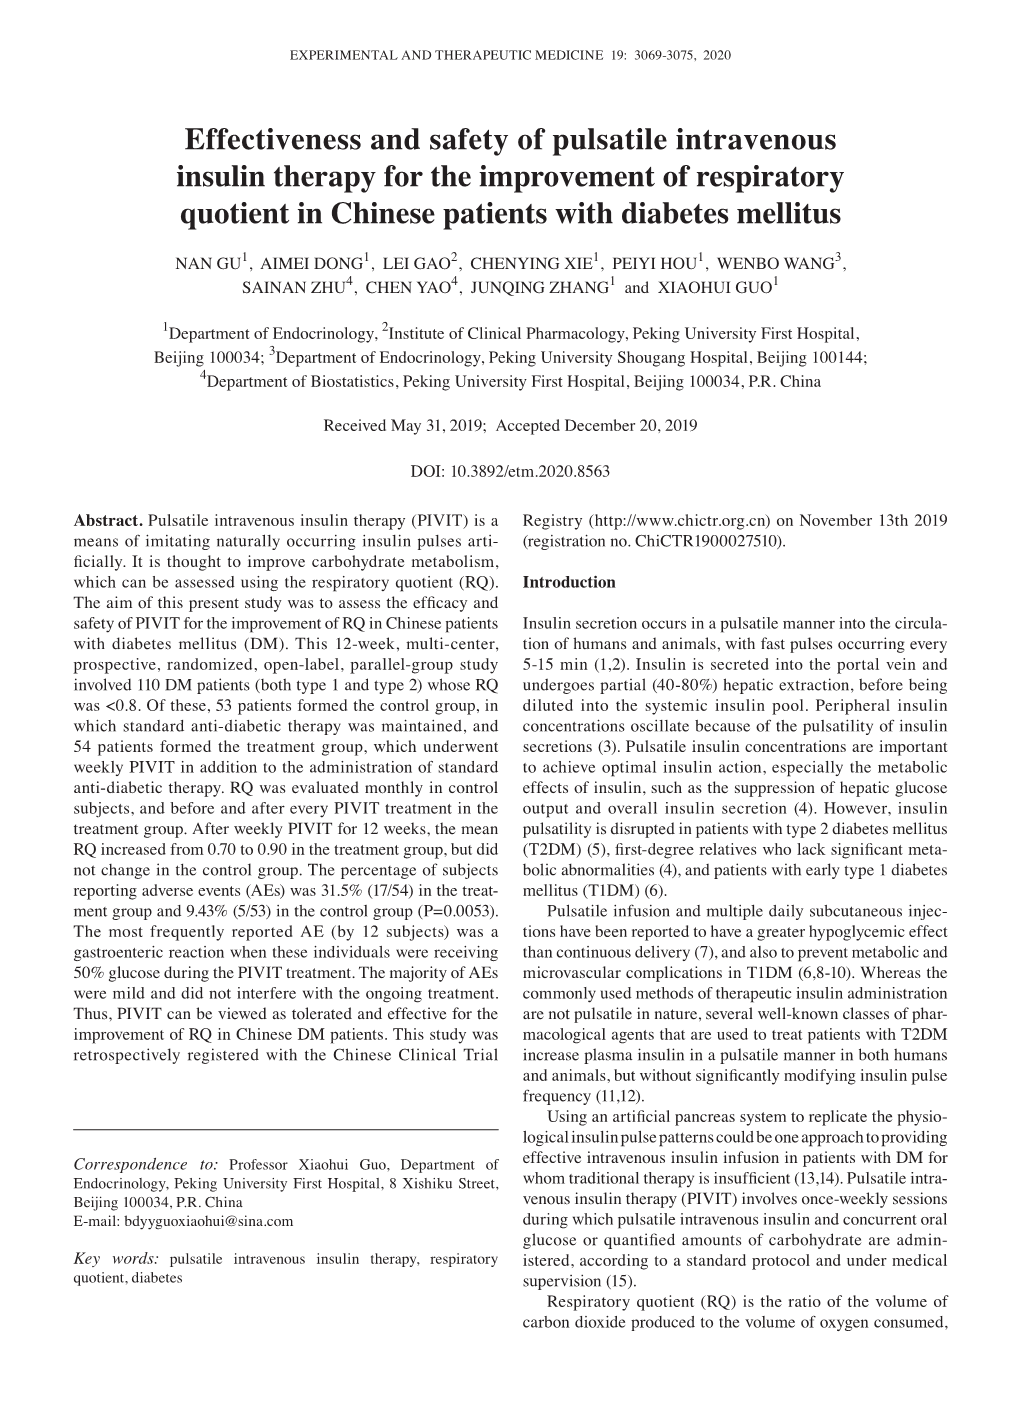 Effectiveness and Safety of Pulsatile Intravenous Insulin Therapy for the Improvement of Respiratory Quotient in Chinese Patients with Diabetes Mellitus